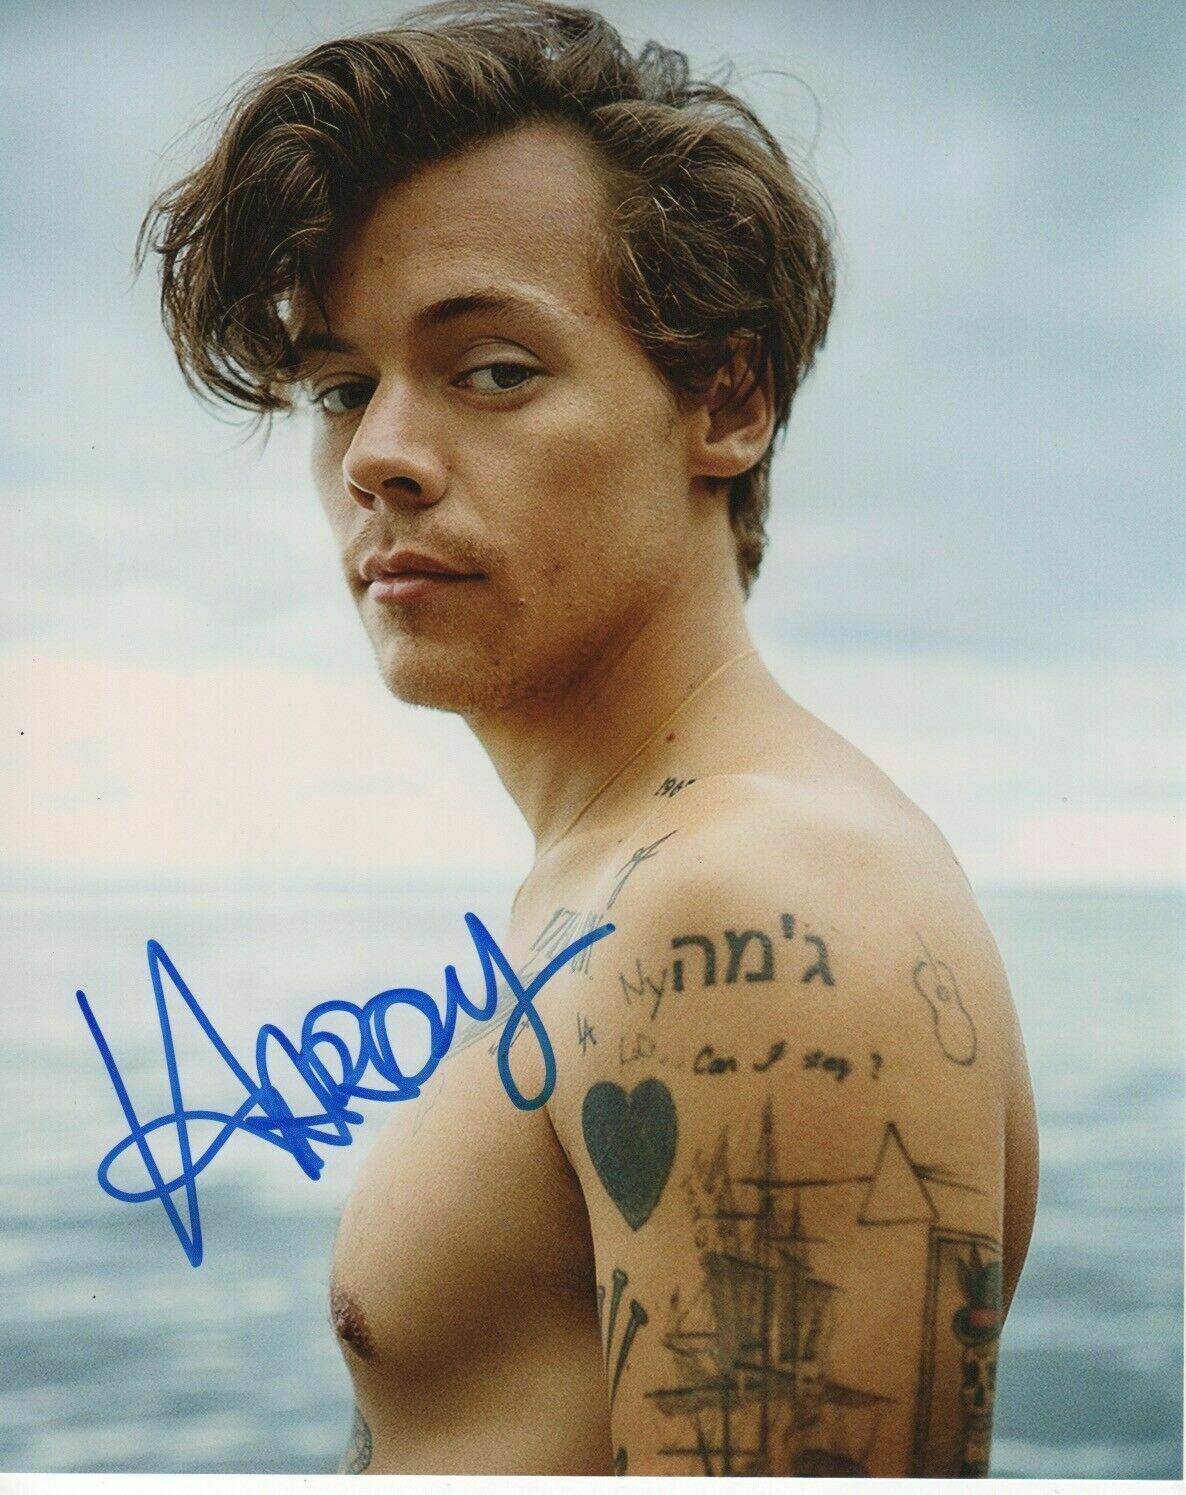 Harry Styles Autographed Signed 8x10 Photo Reprint